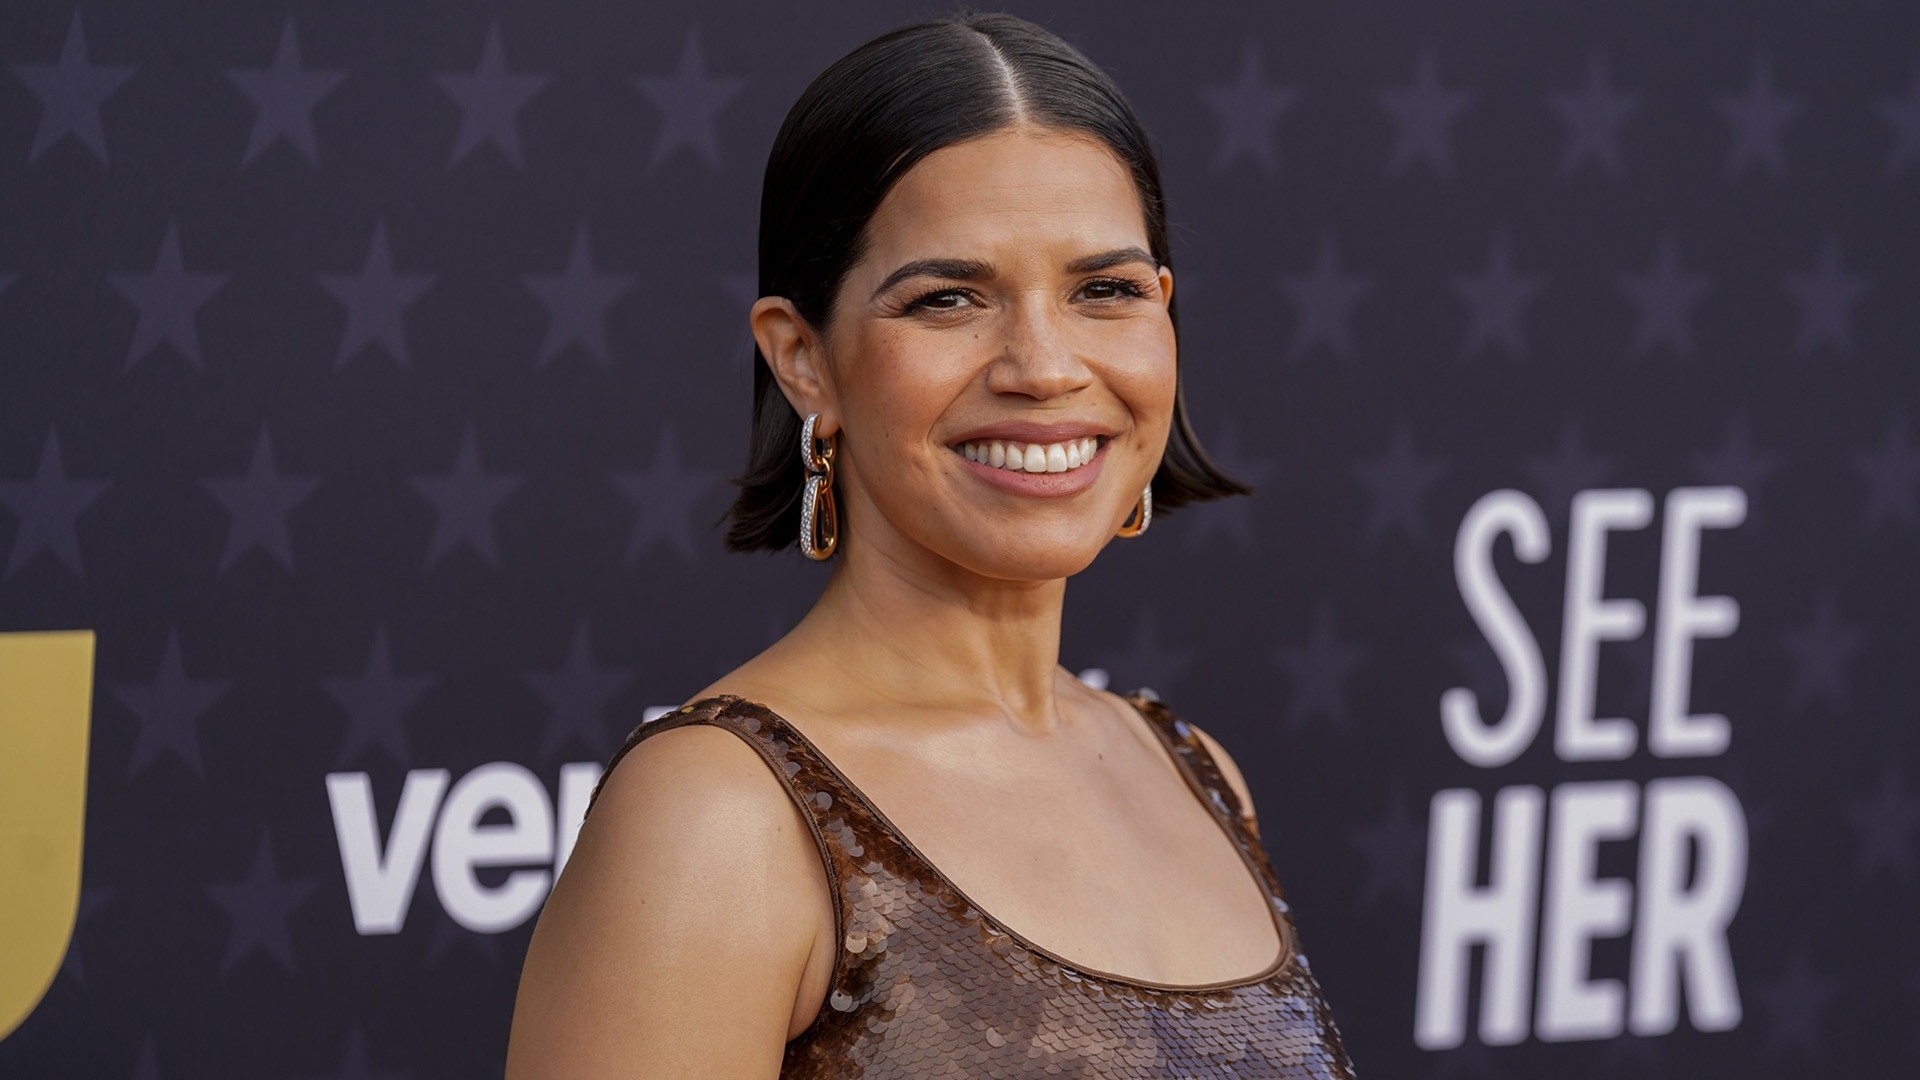 America Ferrera responds to 'Barbie' snubs: 'Disappointment'